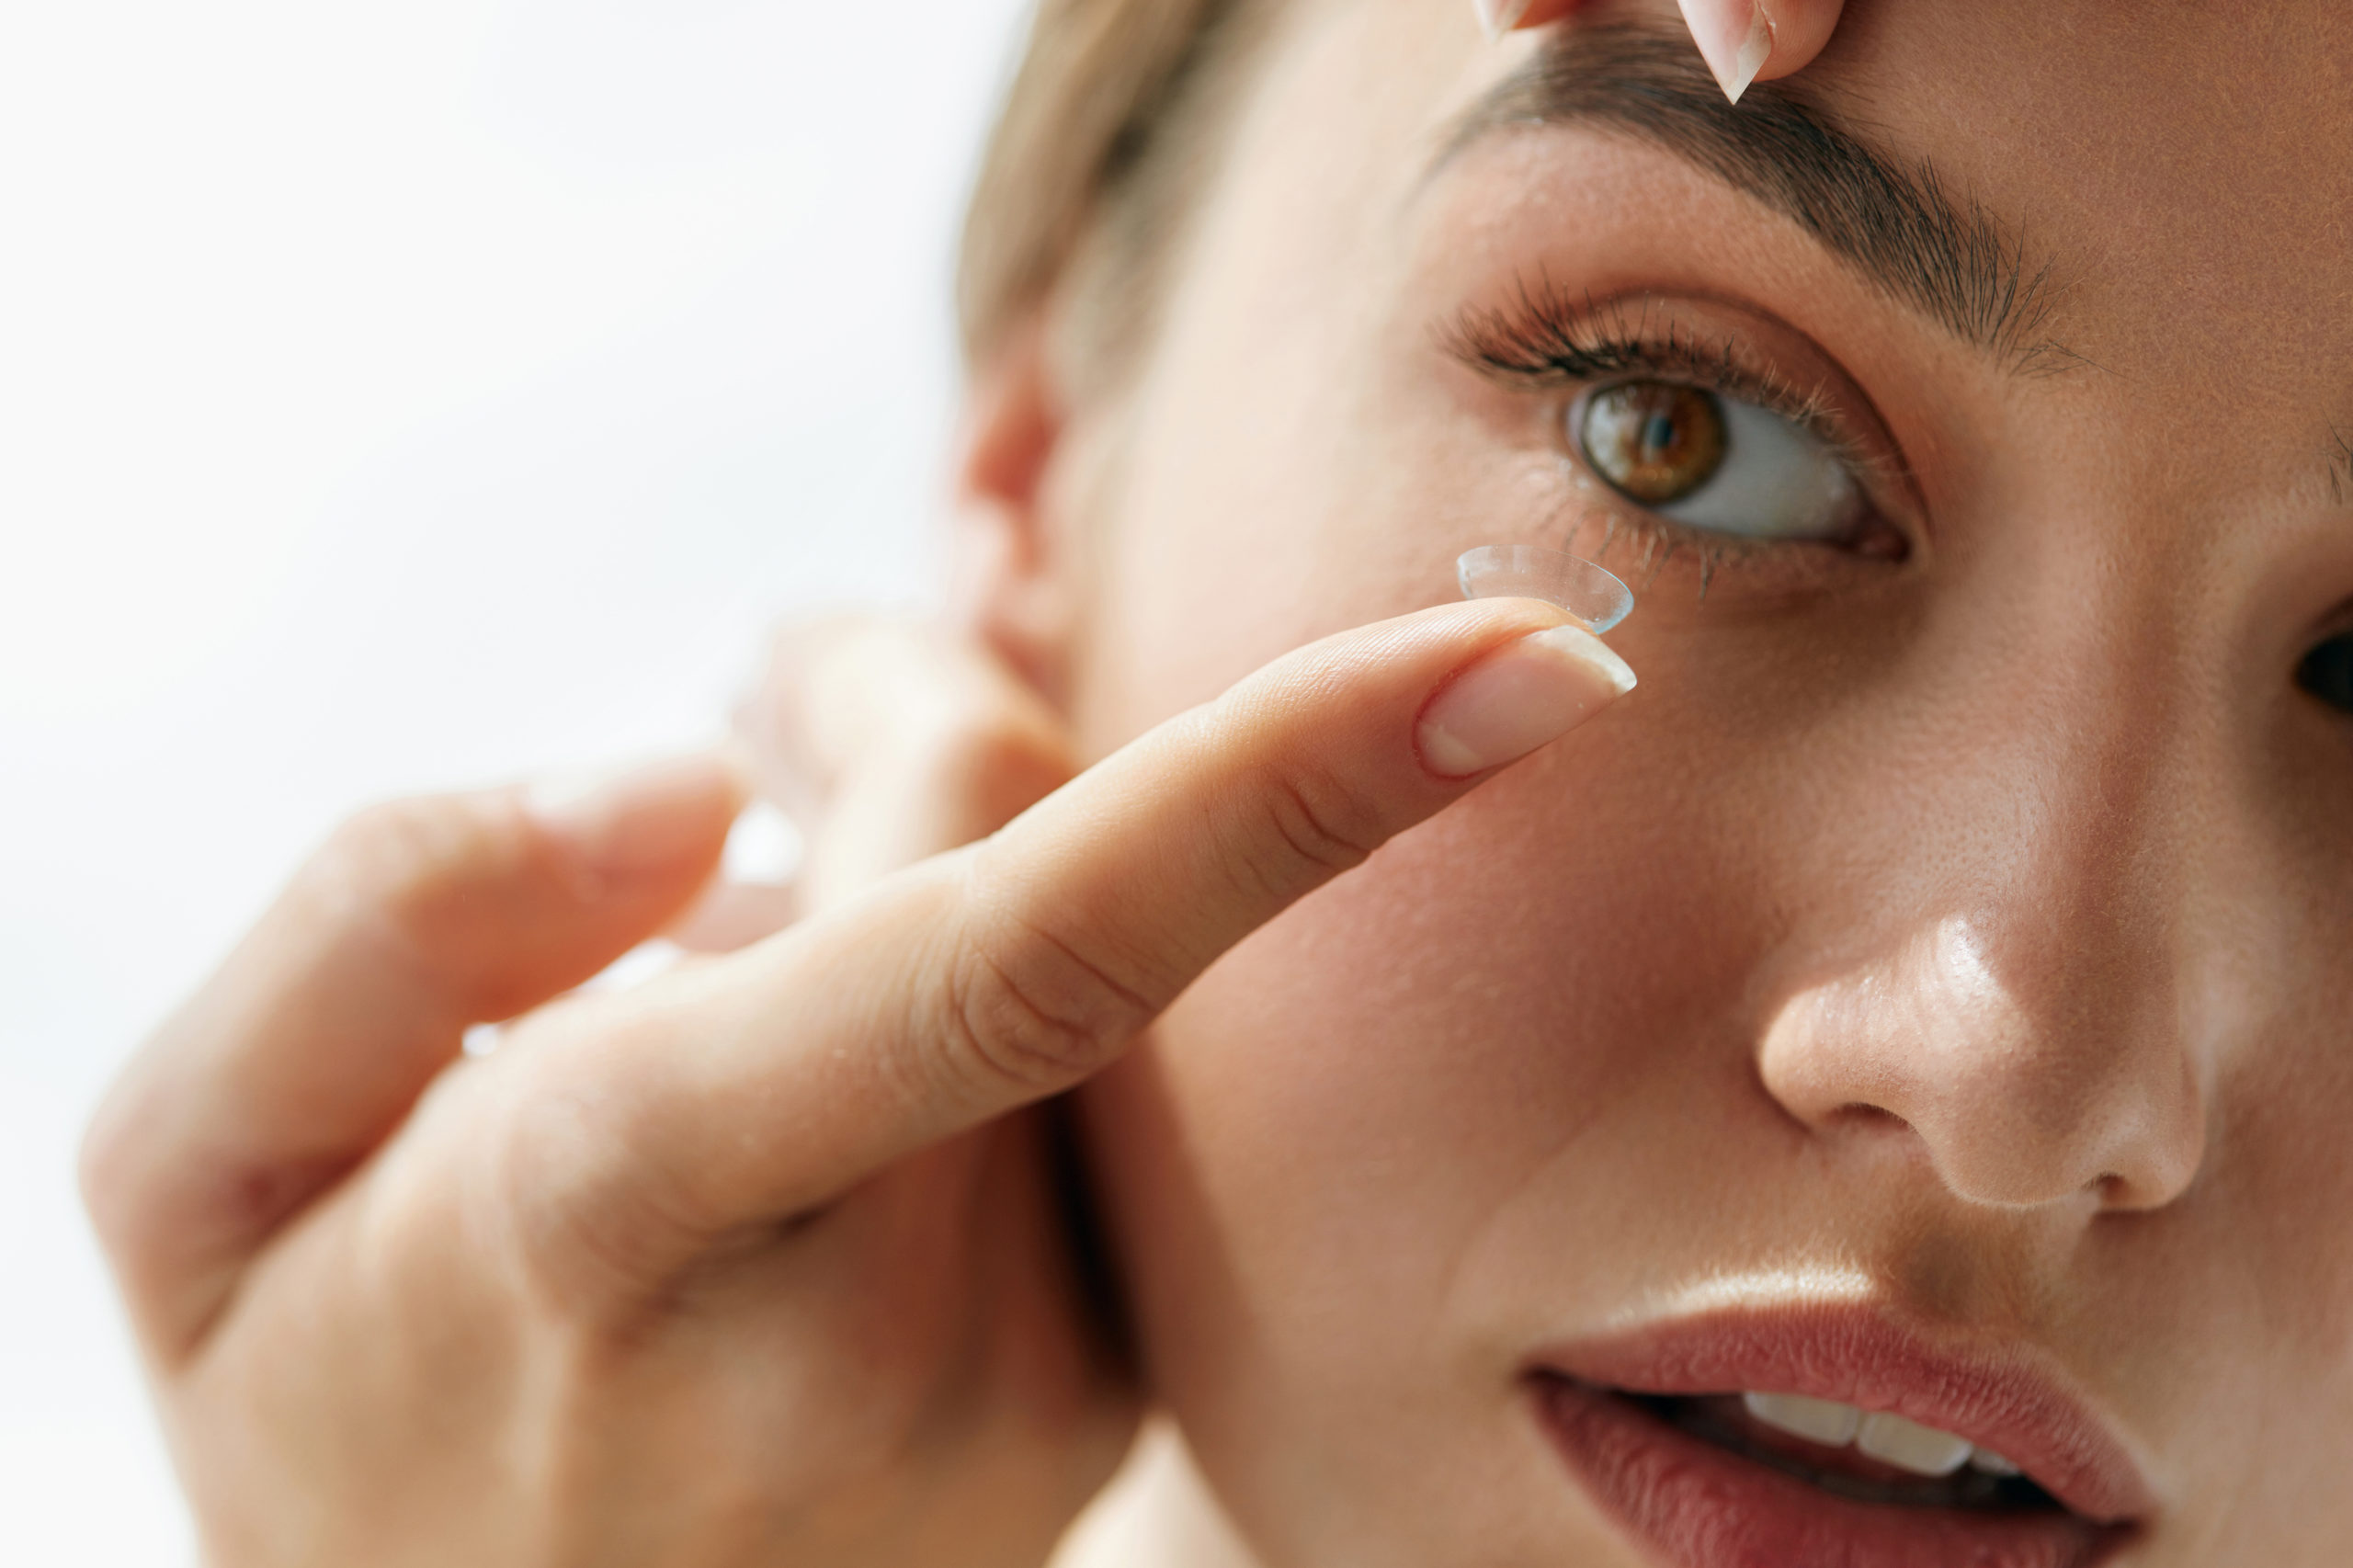 young woman inserting contact lens into eye